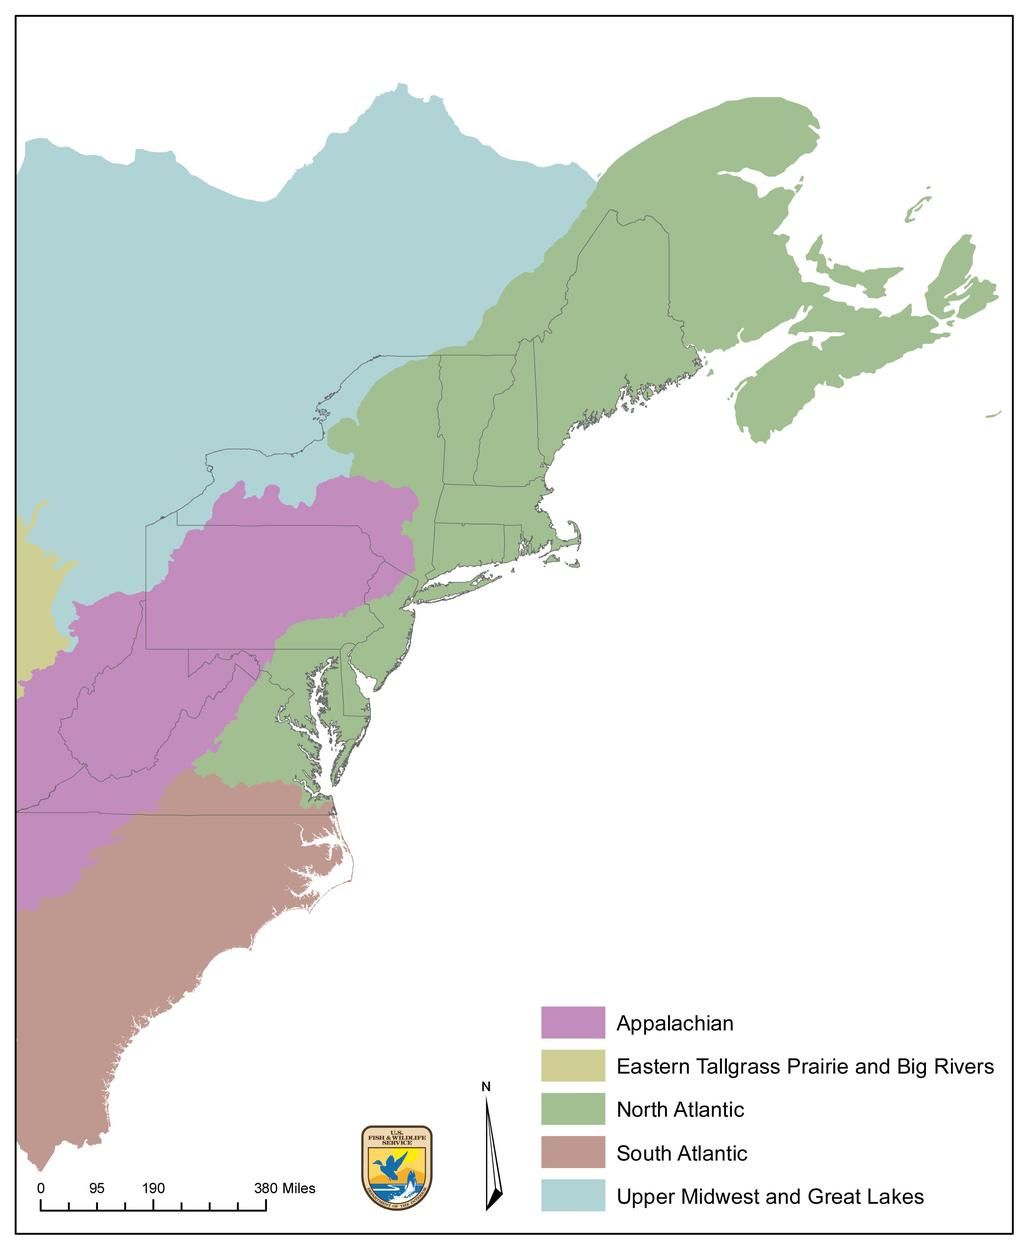 NORTH ATLANTIC LANDSCAPE CONSERVATION COOPERATIVE: 2011 ANNUAL REPORT Introduction This report reviews the progress and accomplishments of the North Atlantic Landscape Conservation Cooperative (LCC)